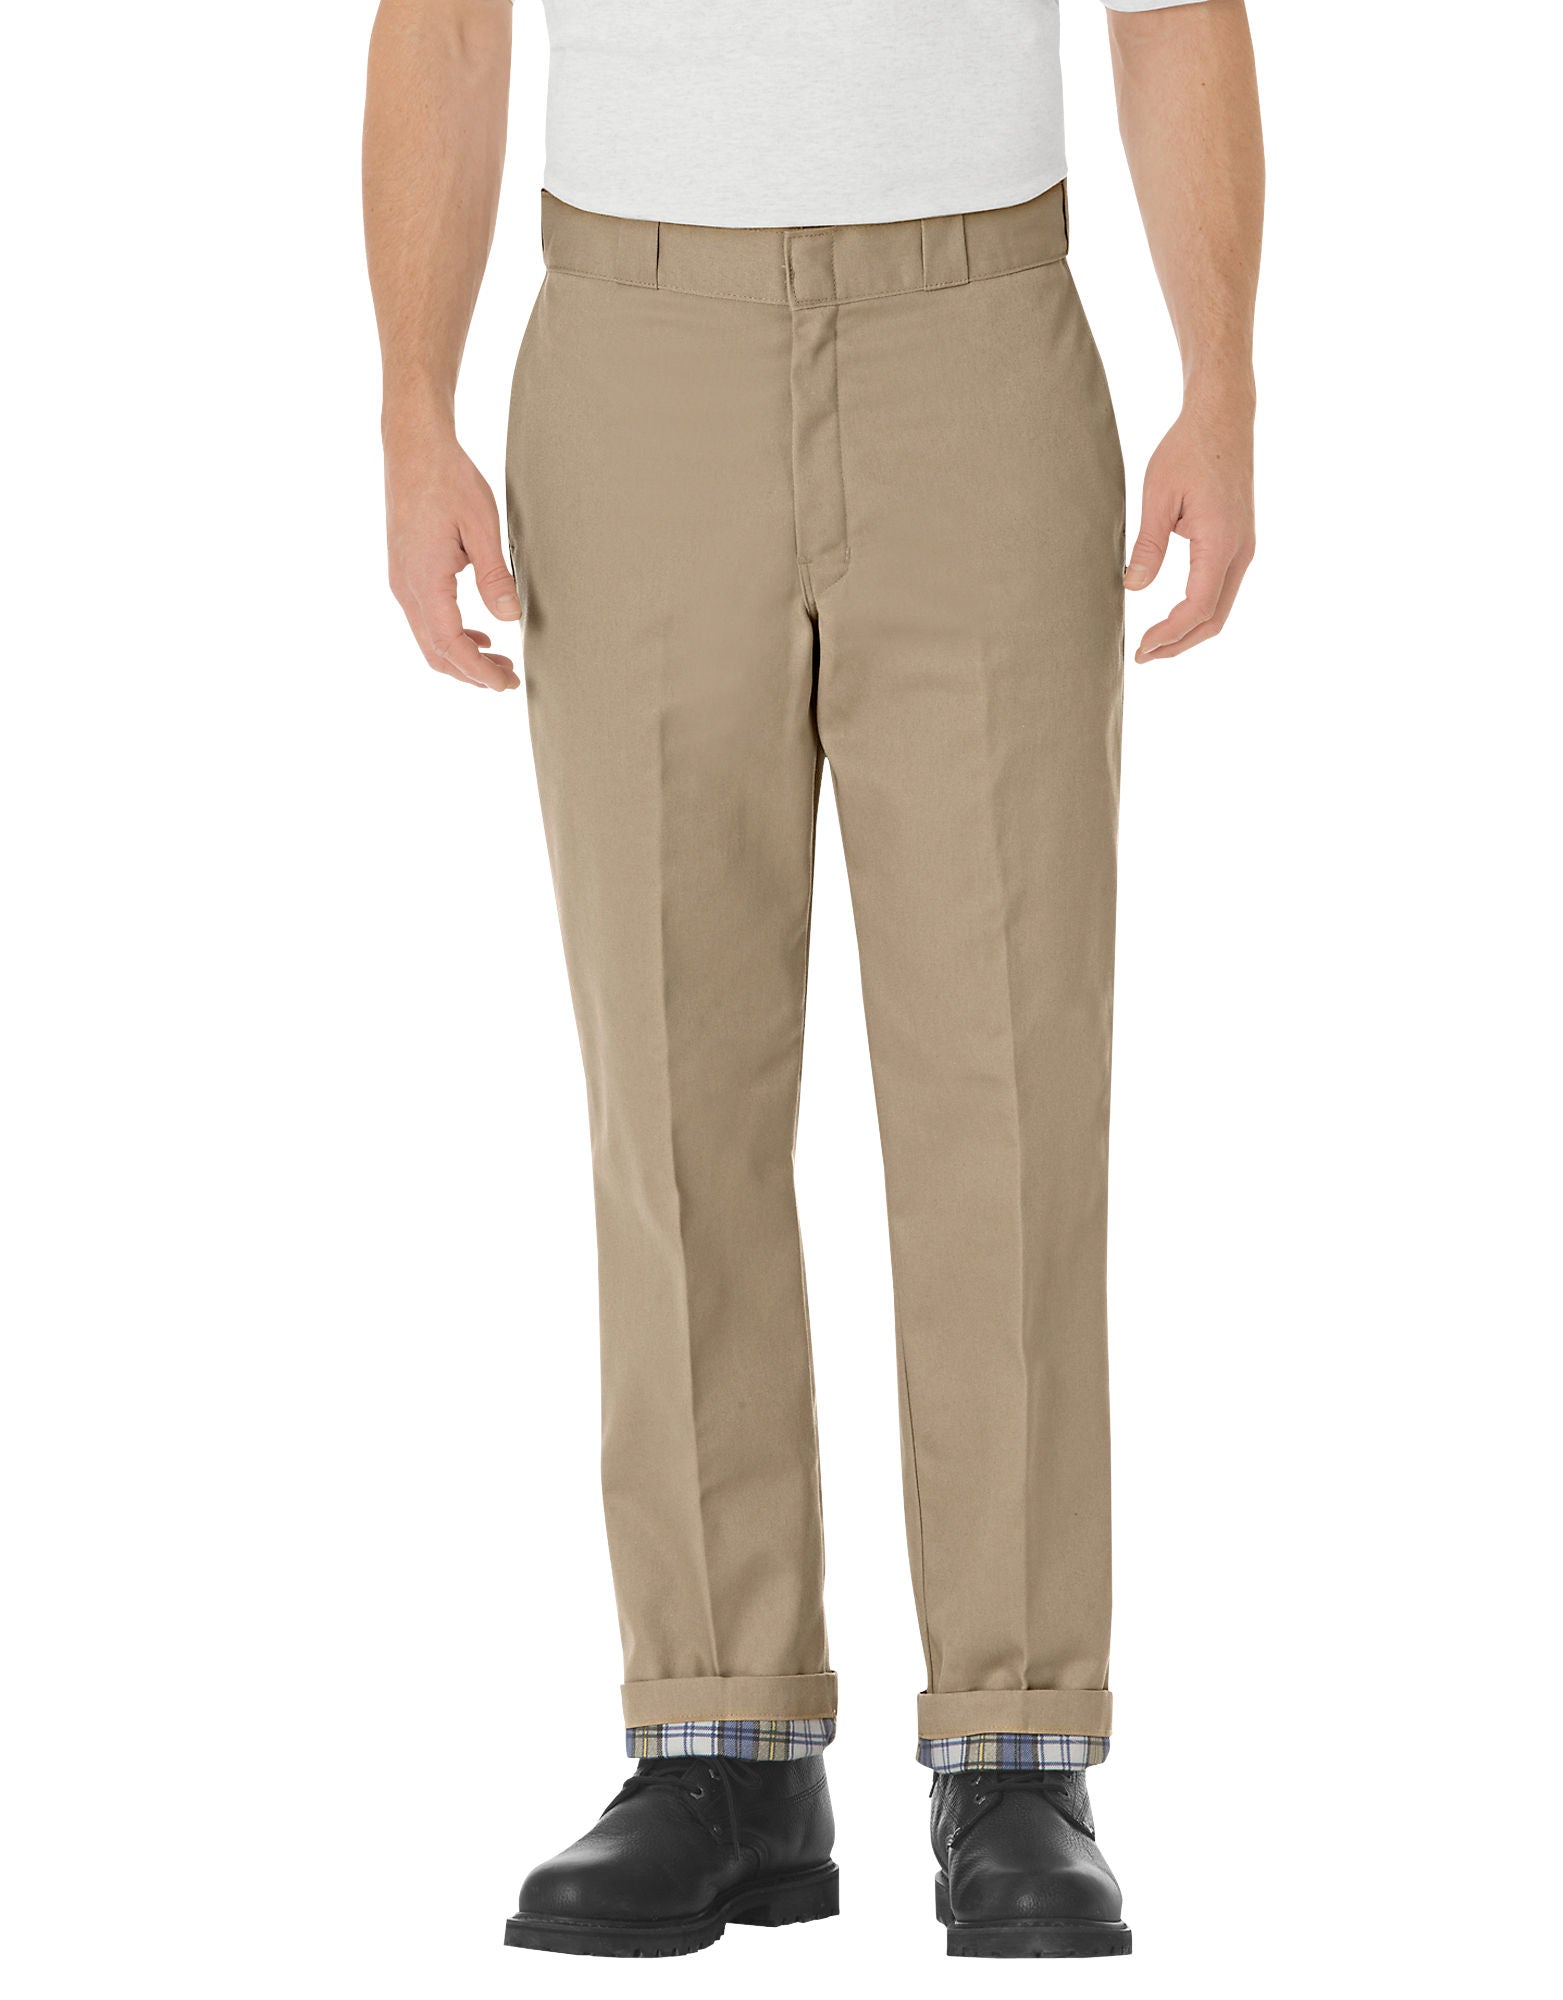 DIC-2874 - Dickies Mens Relaxed Fit Flannel Lined Work Pants